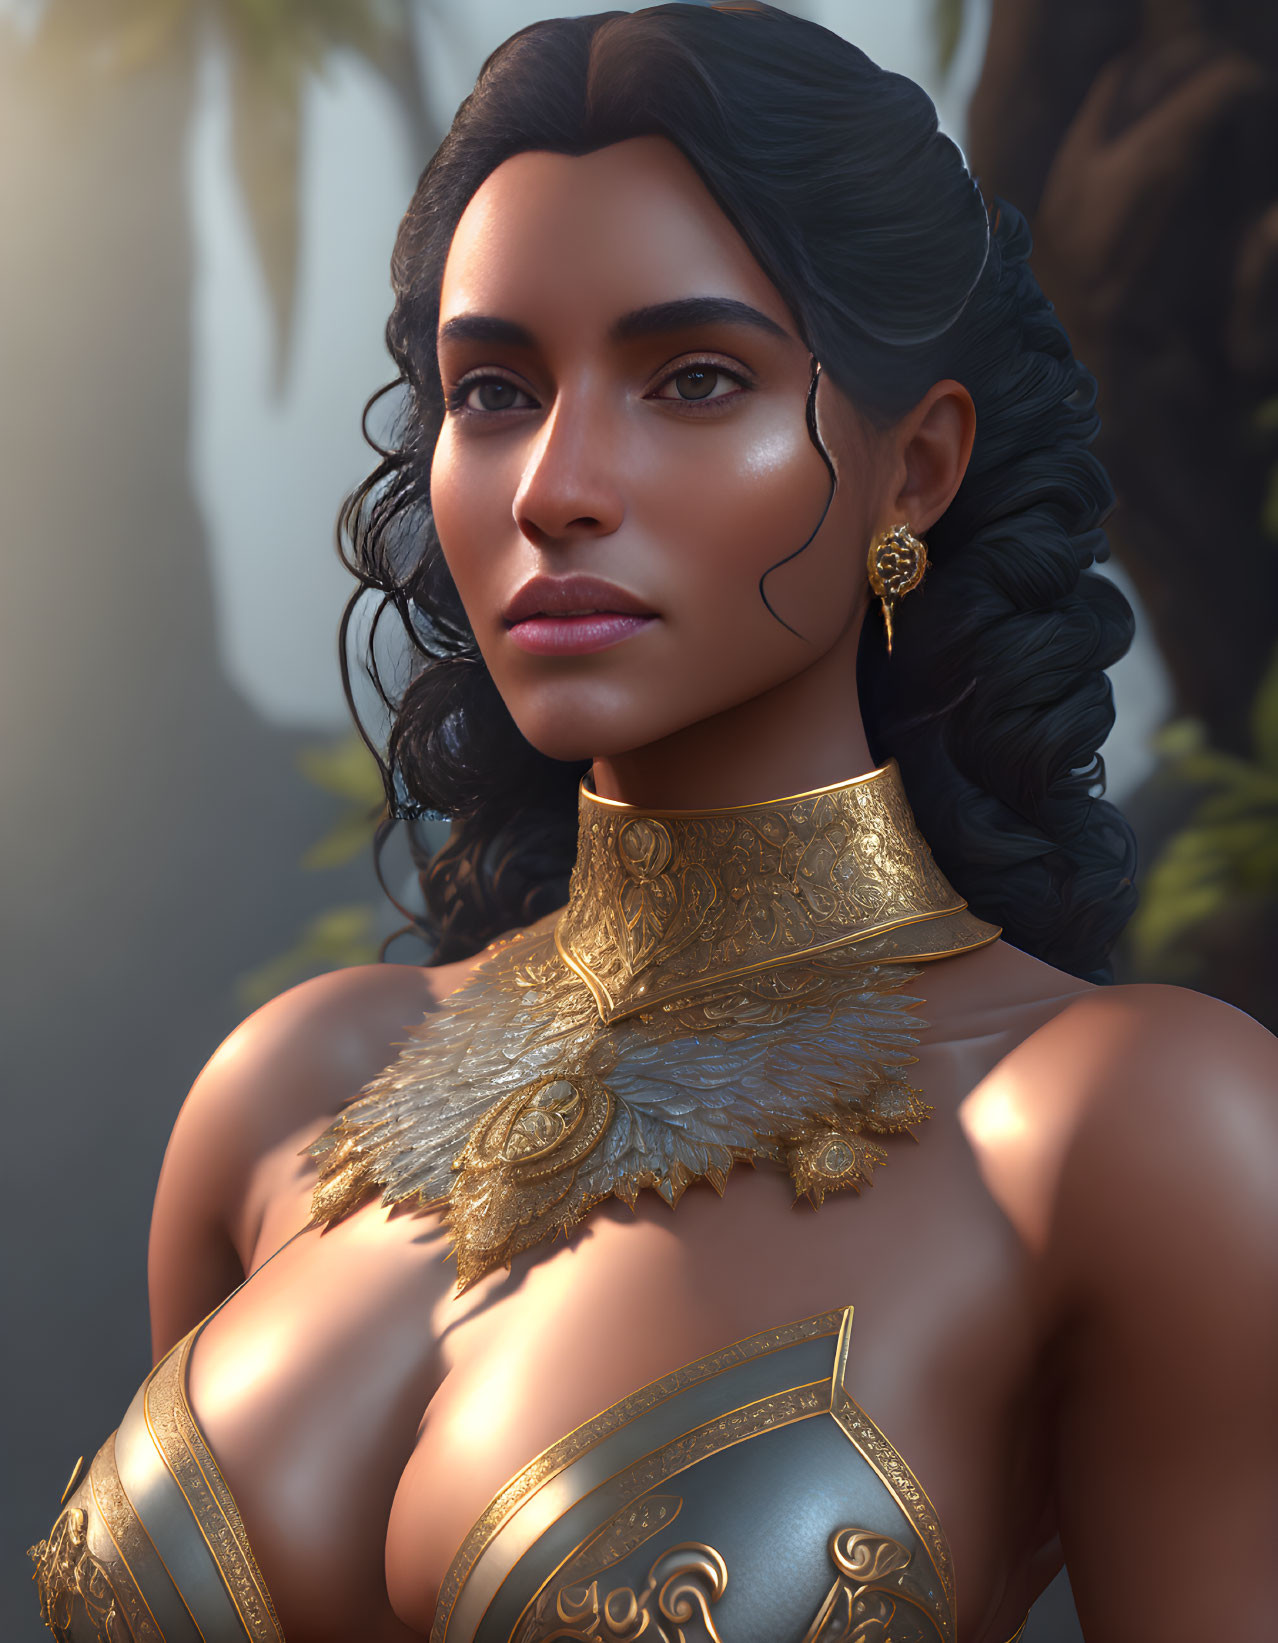 Digital portrait of woman in braid with golden jewelry and ornate armor